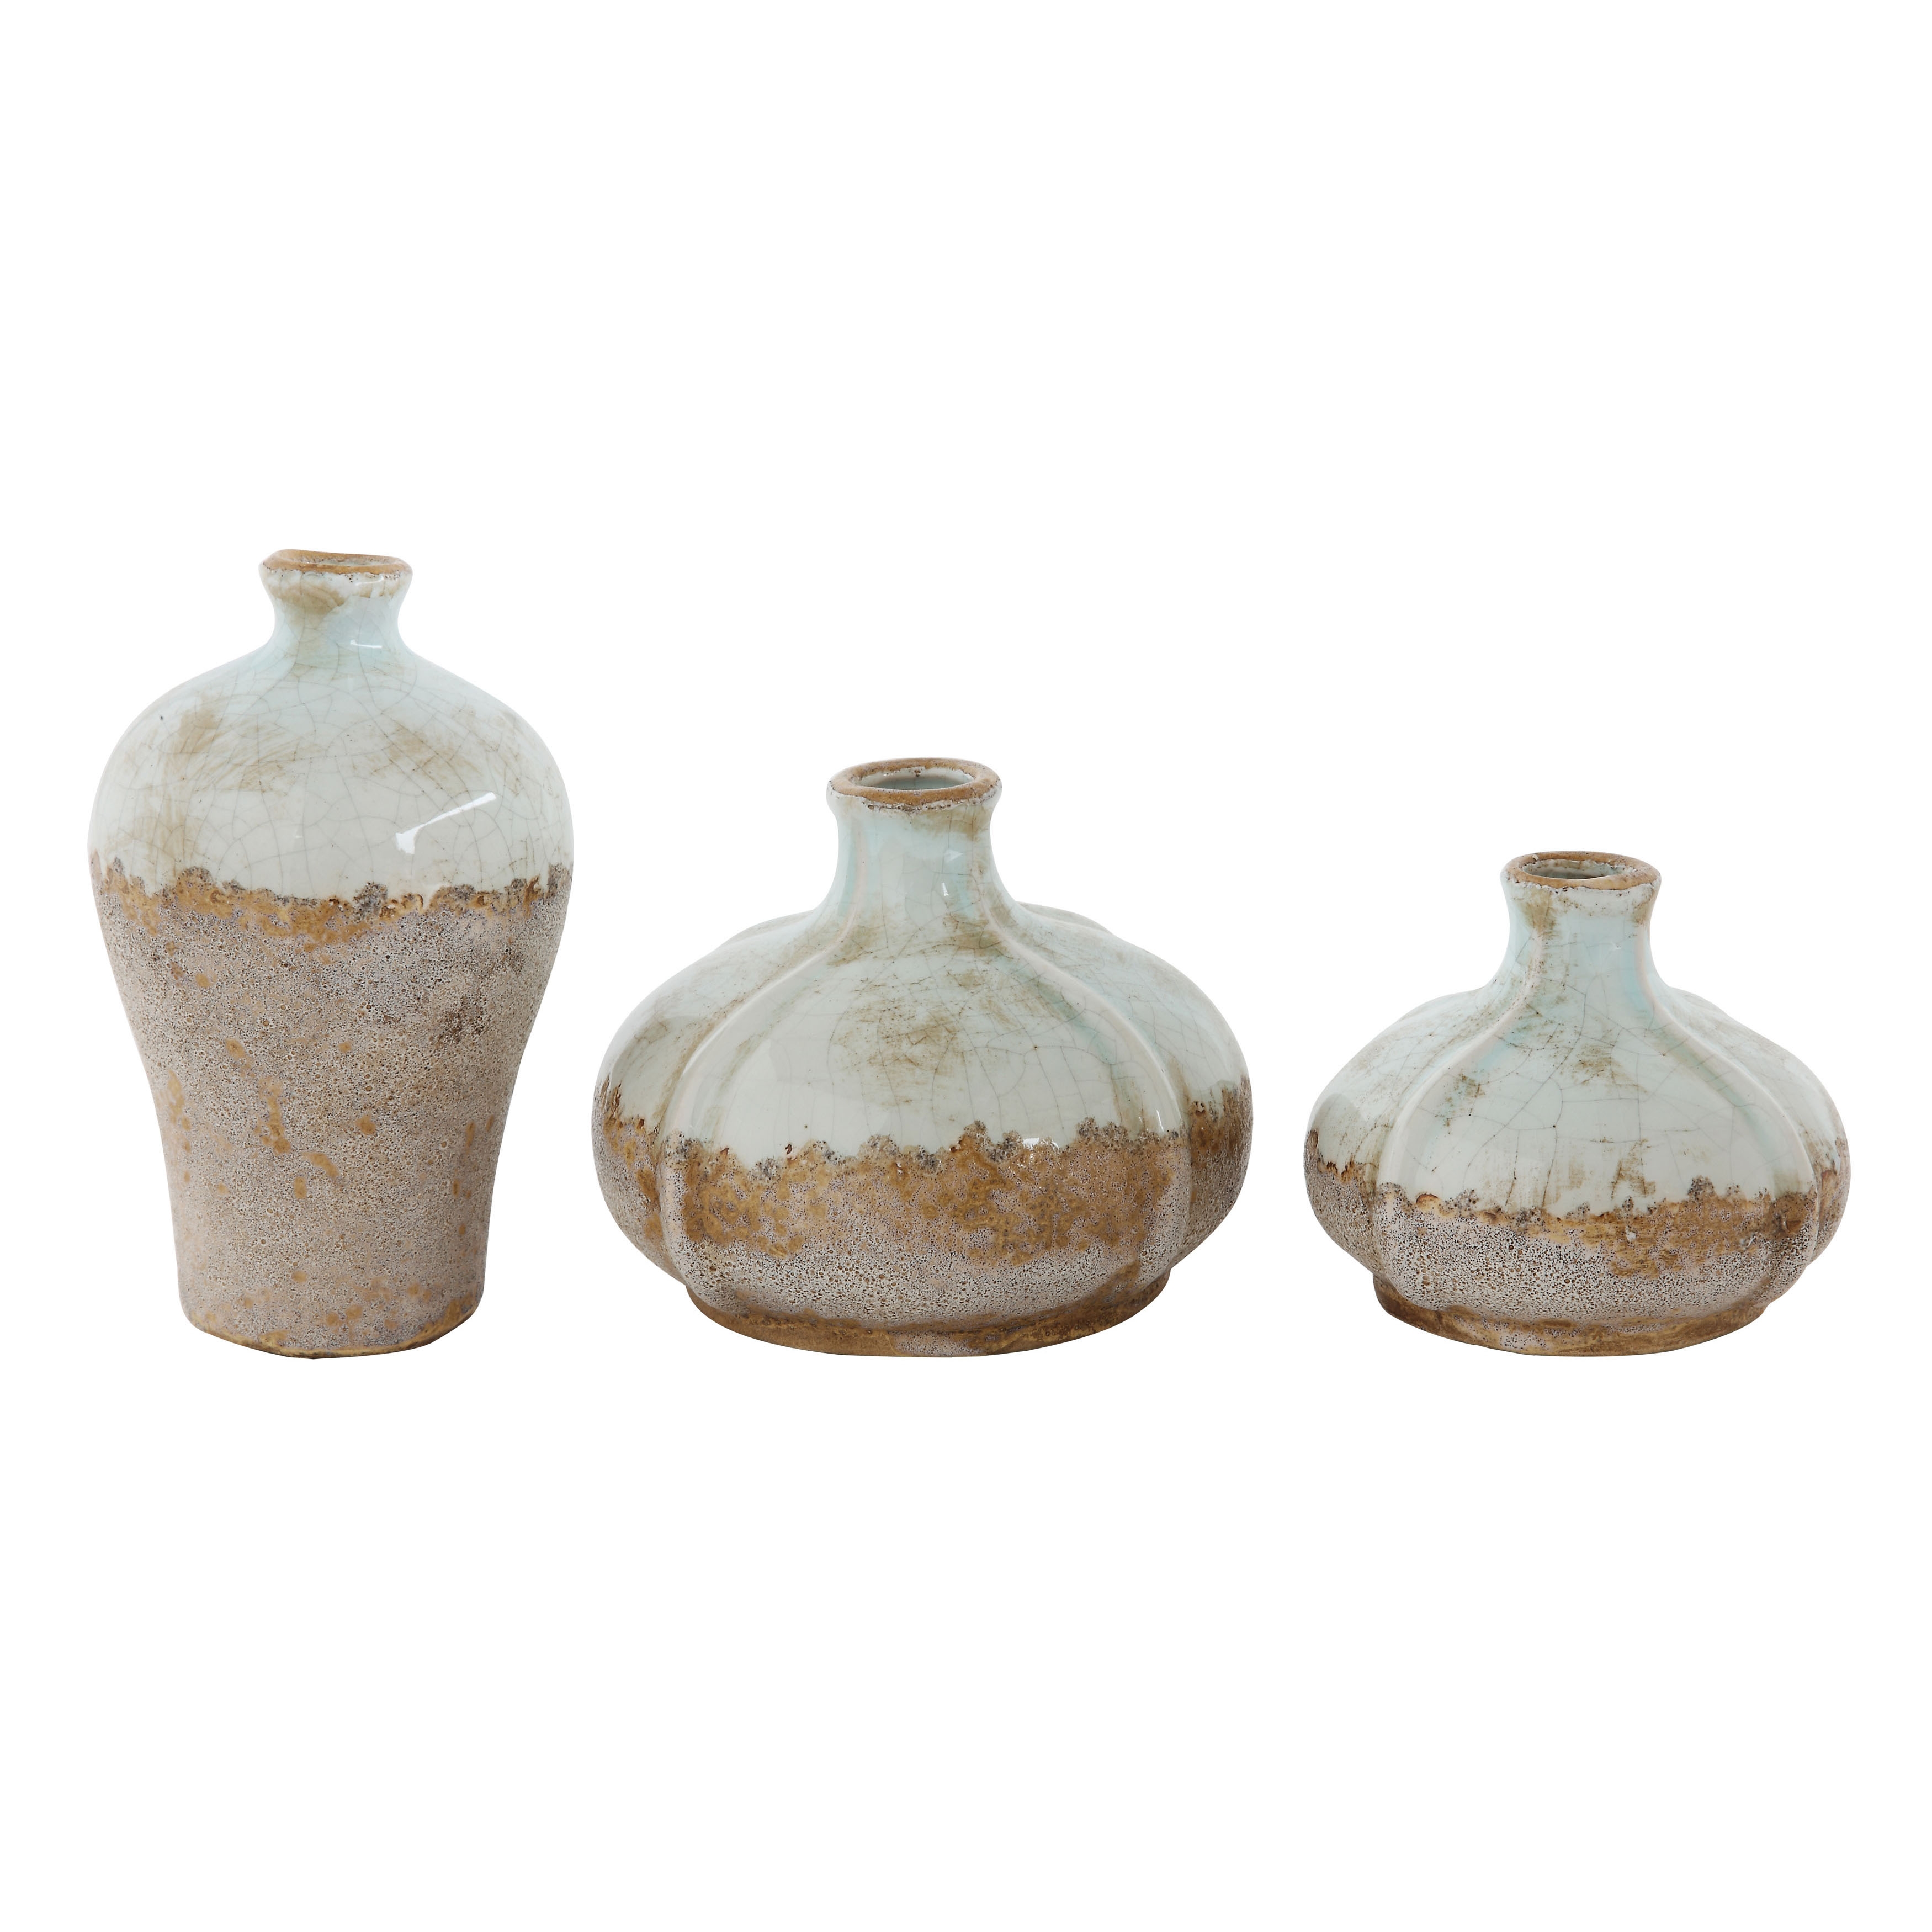 Various Decorative Terra-cotta Vases with Distressed Finish, Brown and White, Set of 3 - Image 0